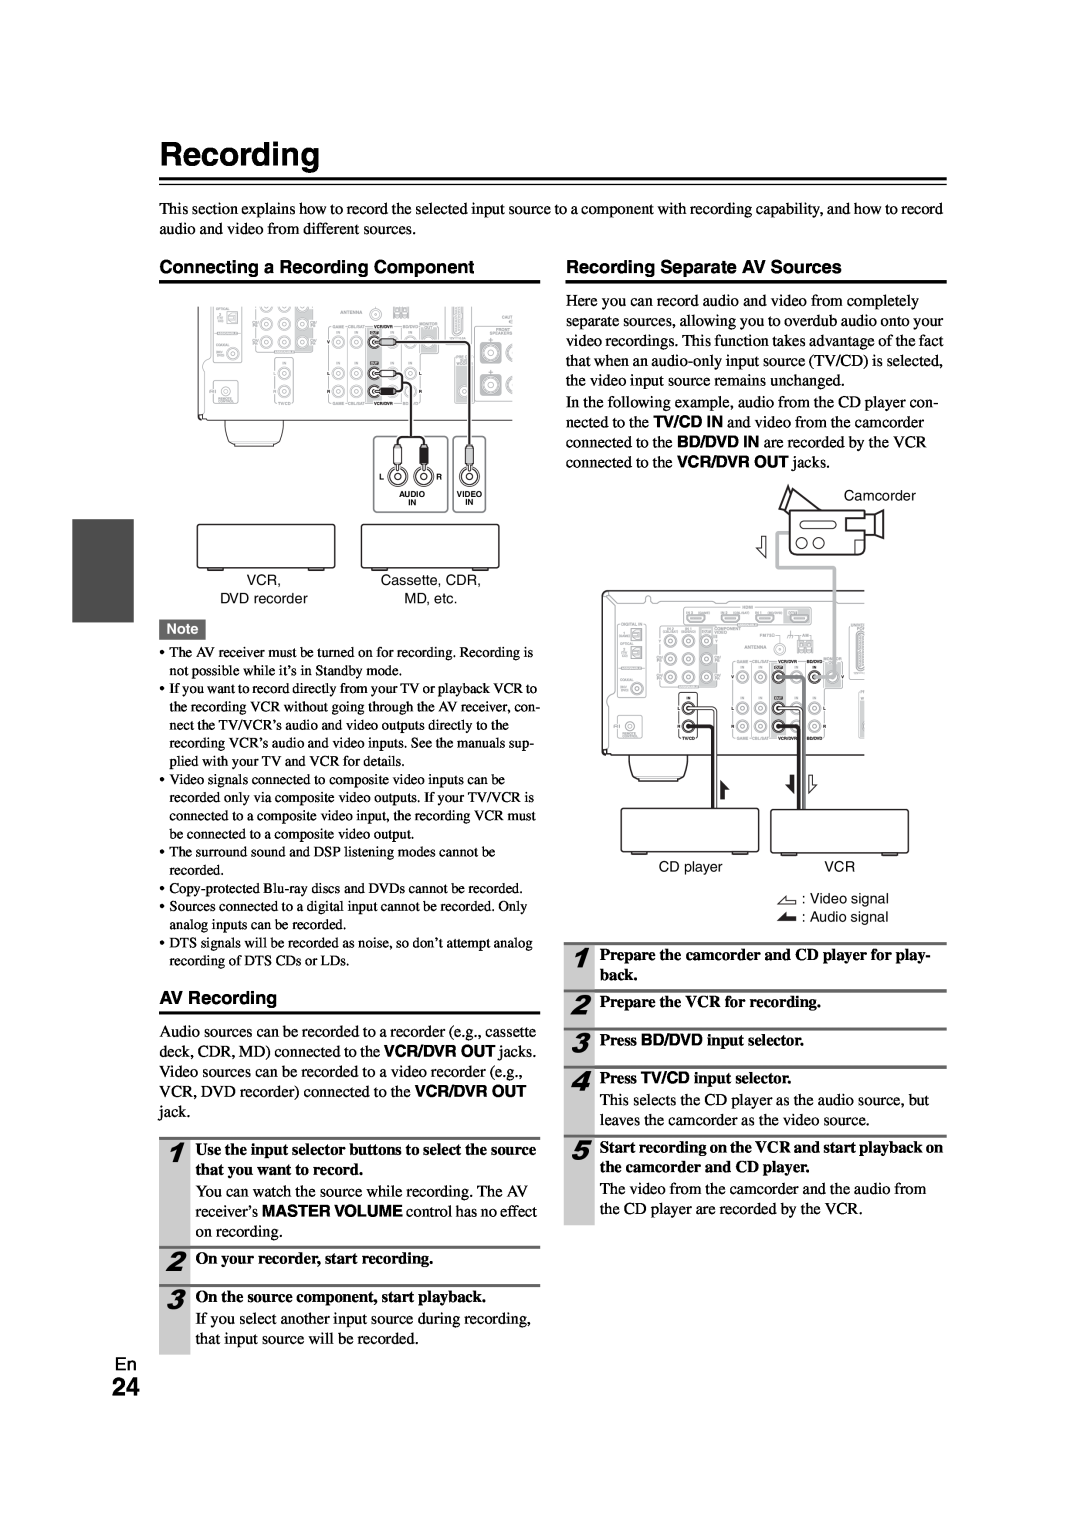 Onkyo SR308 instruction manual Connecting a Recording Component, AV Recording, Recording Separate AV Sources 